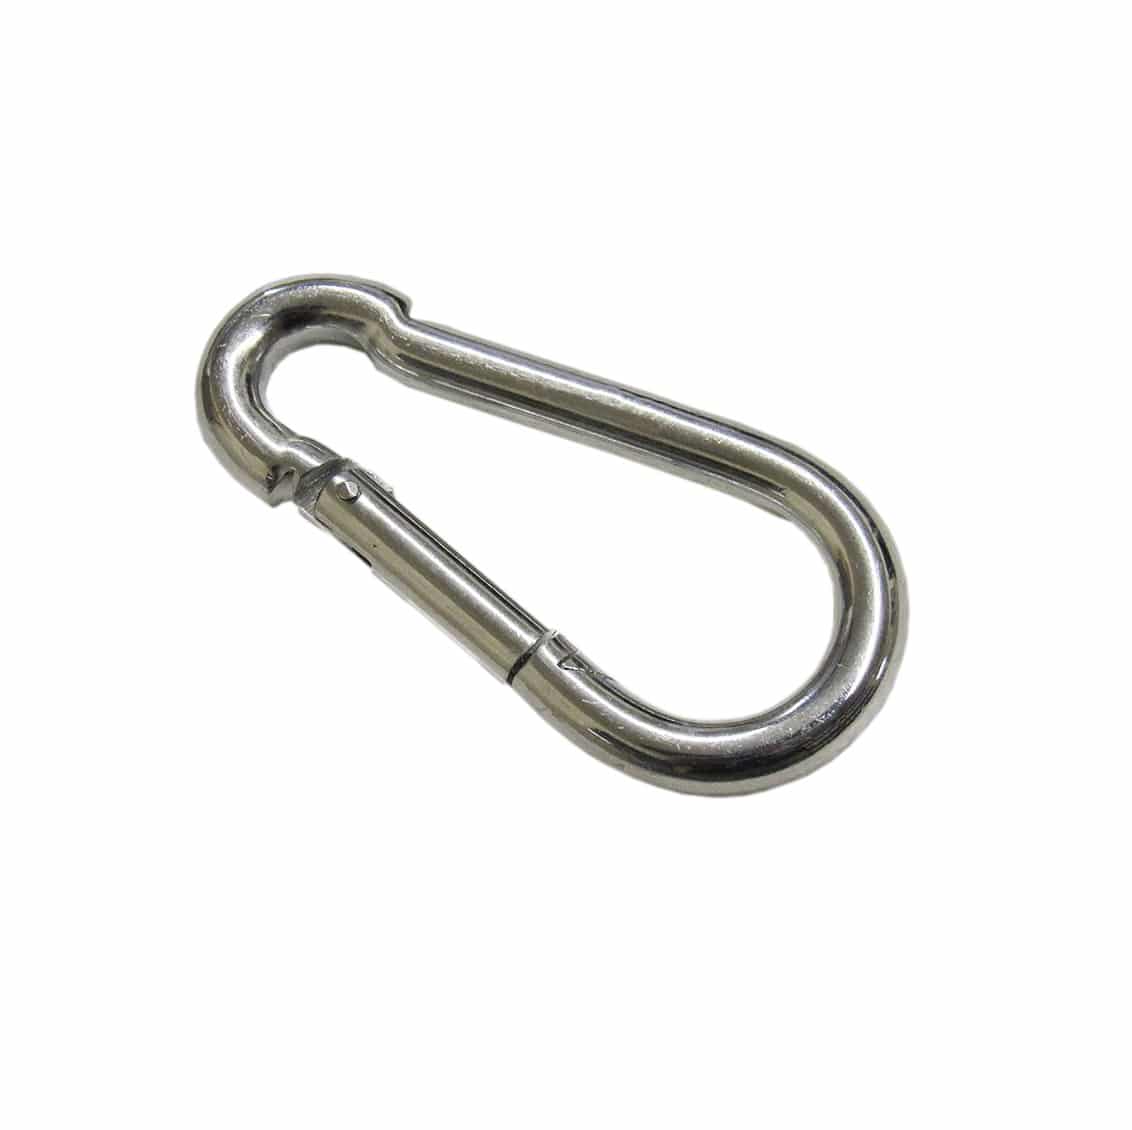 Carbine Hook BZP - 5mm x 50mm - For Heavy Duty Curtain Track Systems